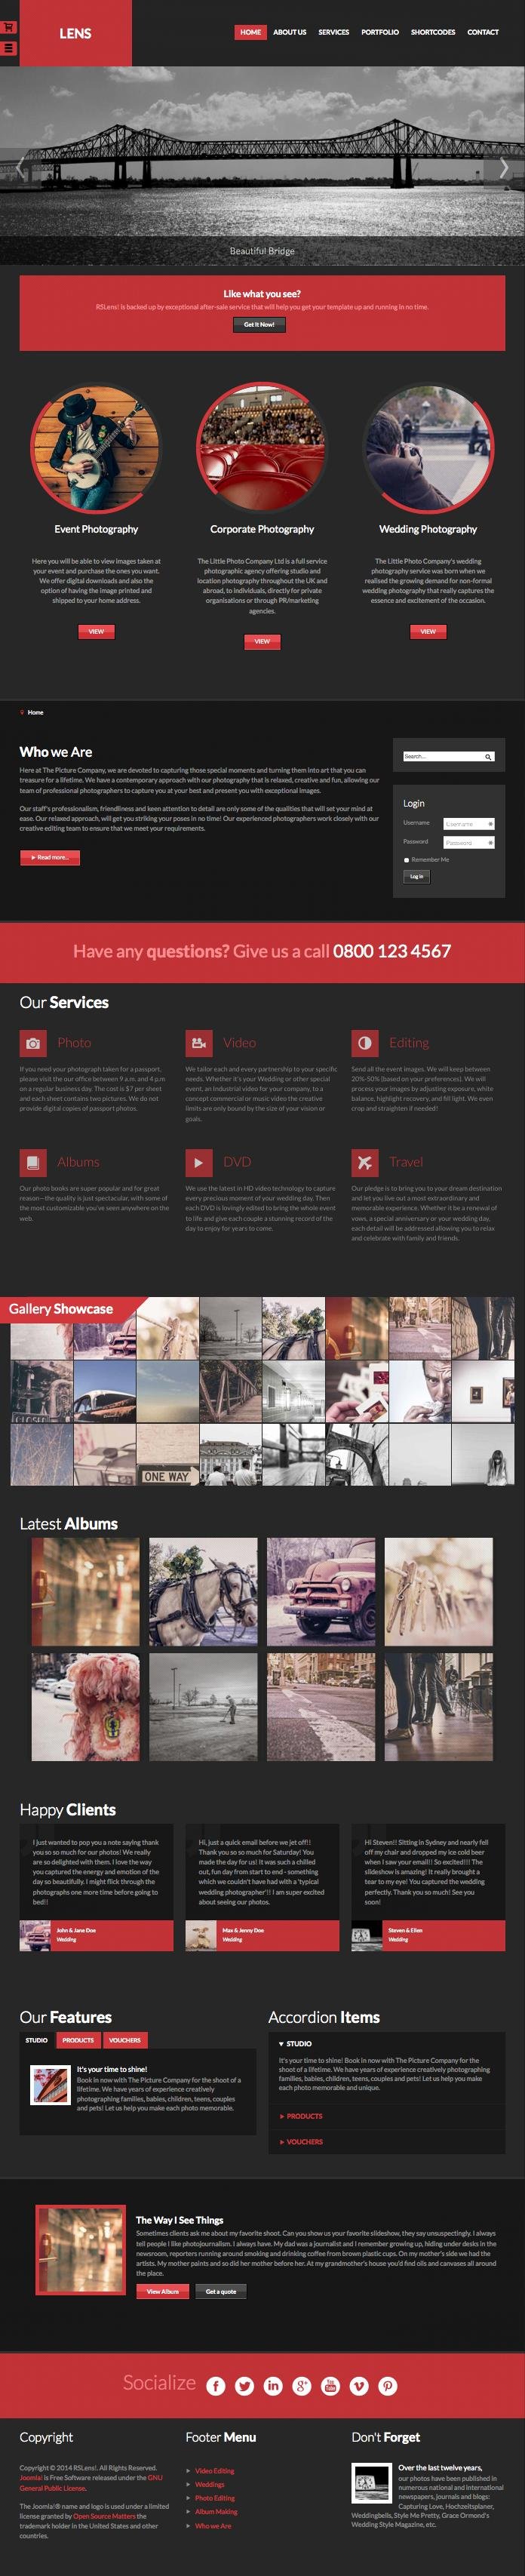 RSLens Joomla Events Photography Template